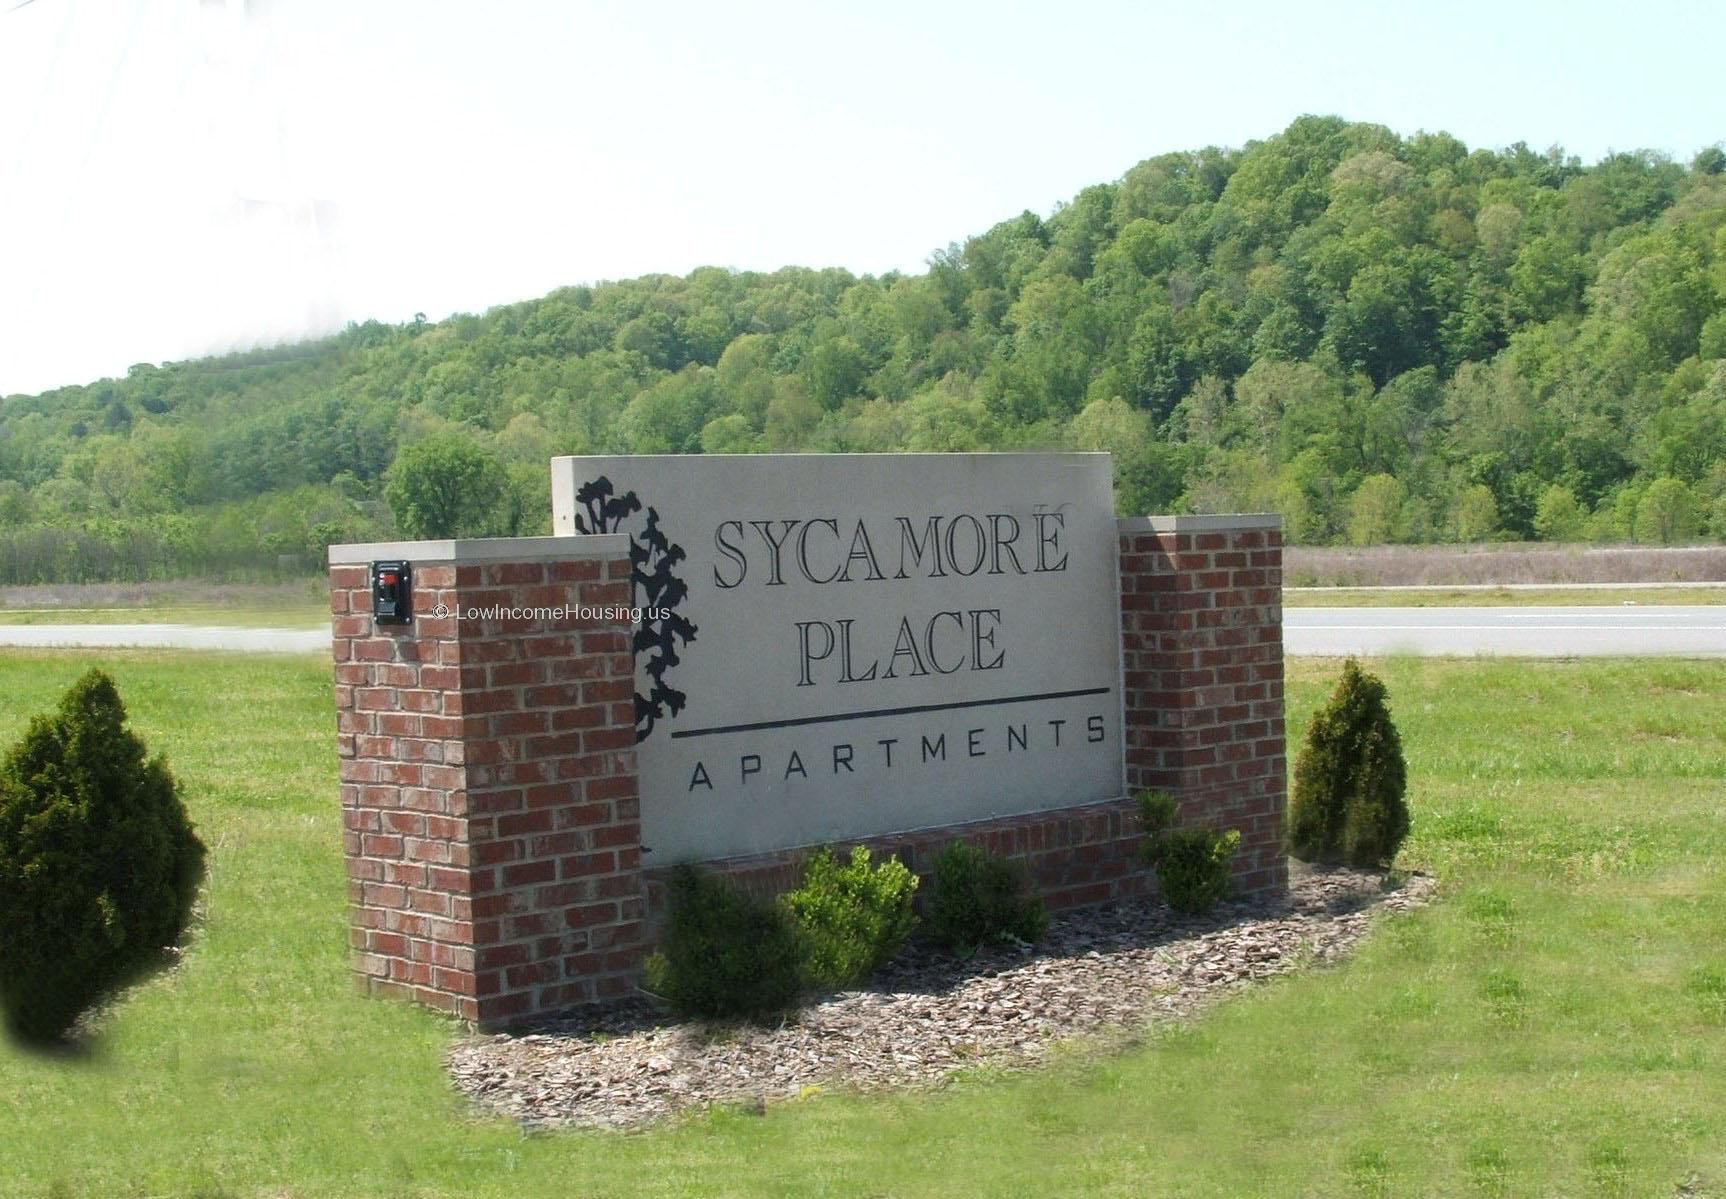 Sycamore Place